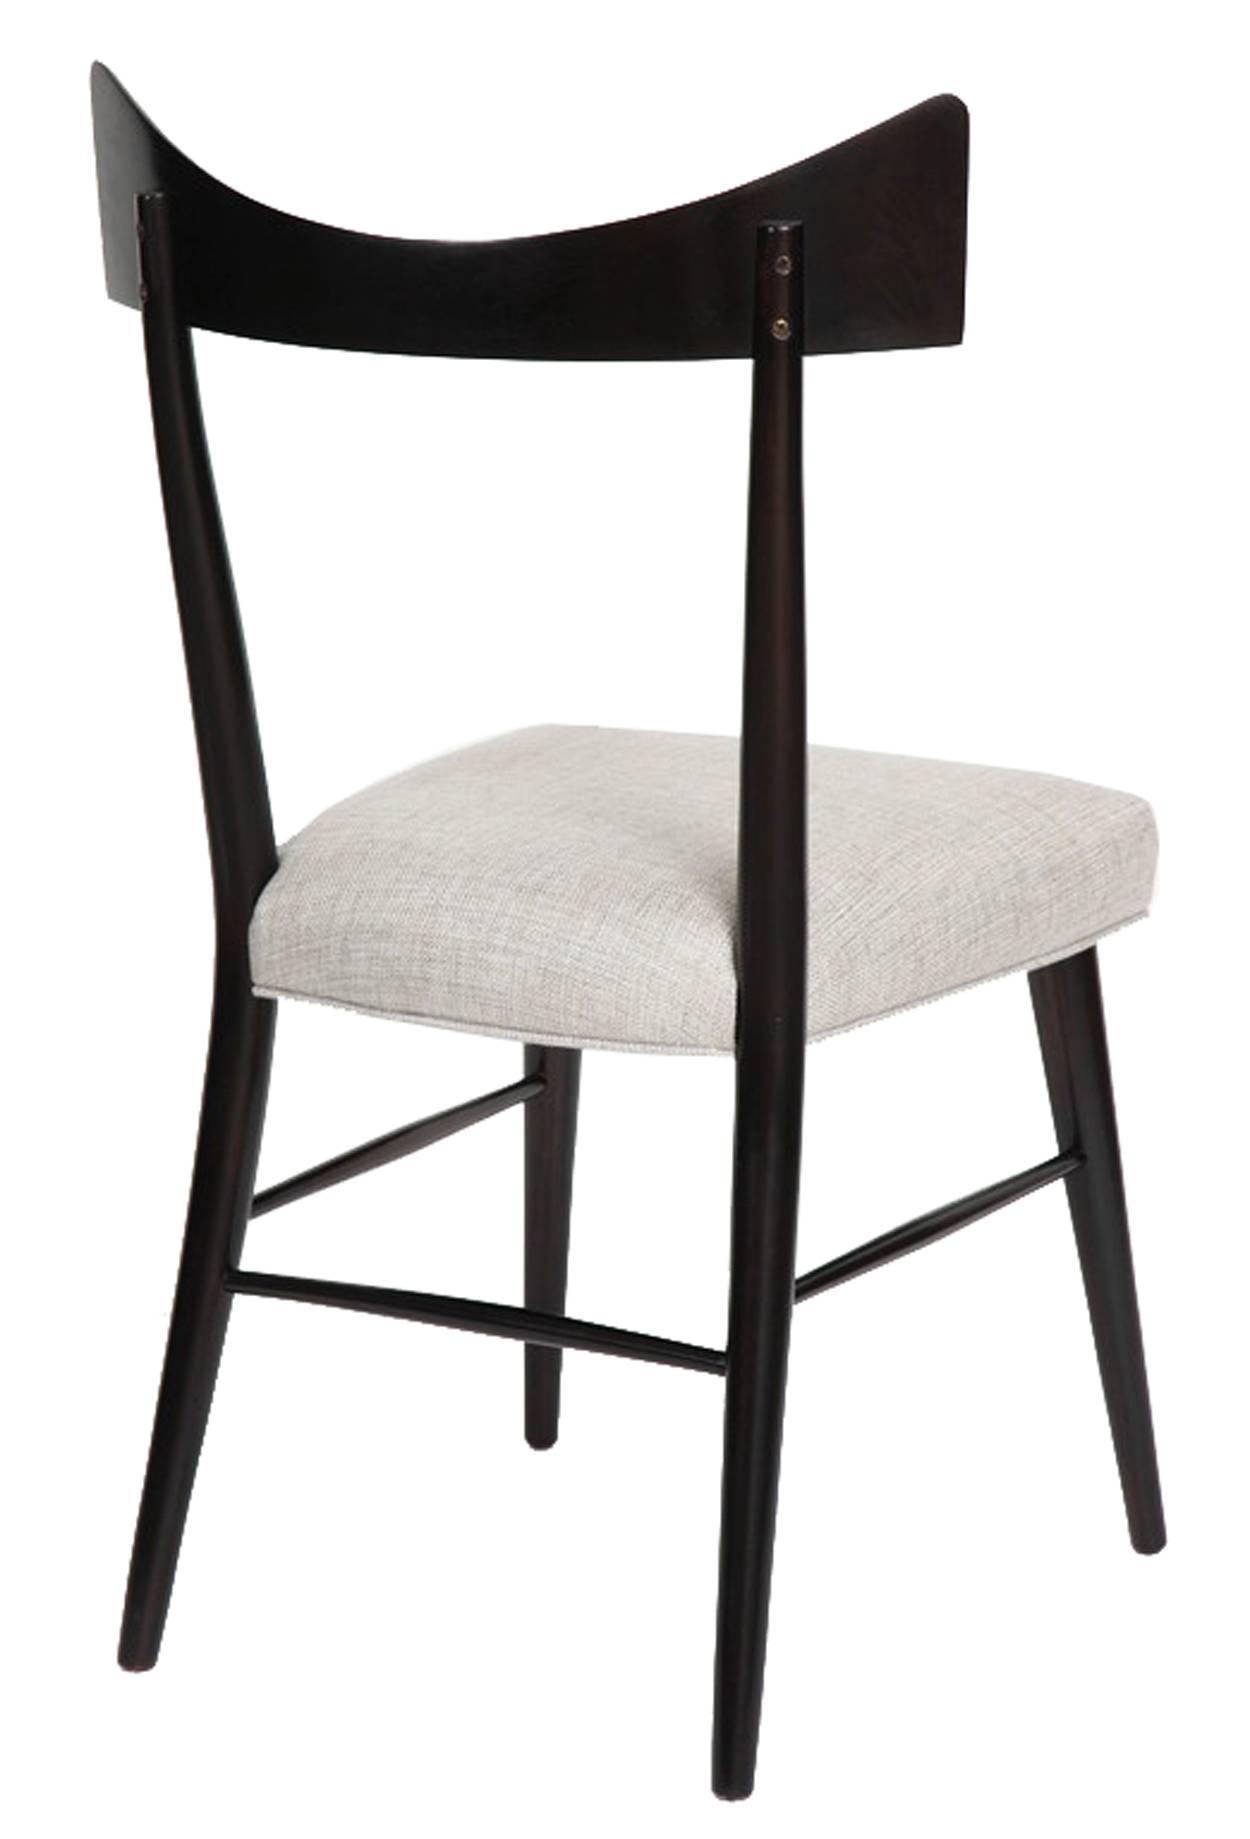 Paul McCobb Planner Group 8 Dining Chairs 1